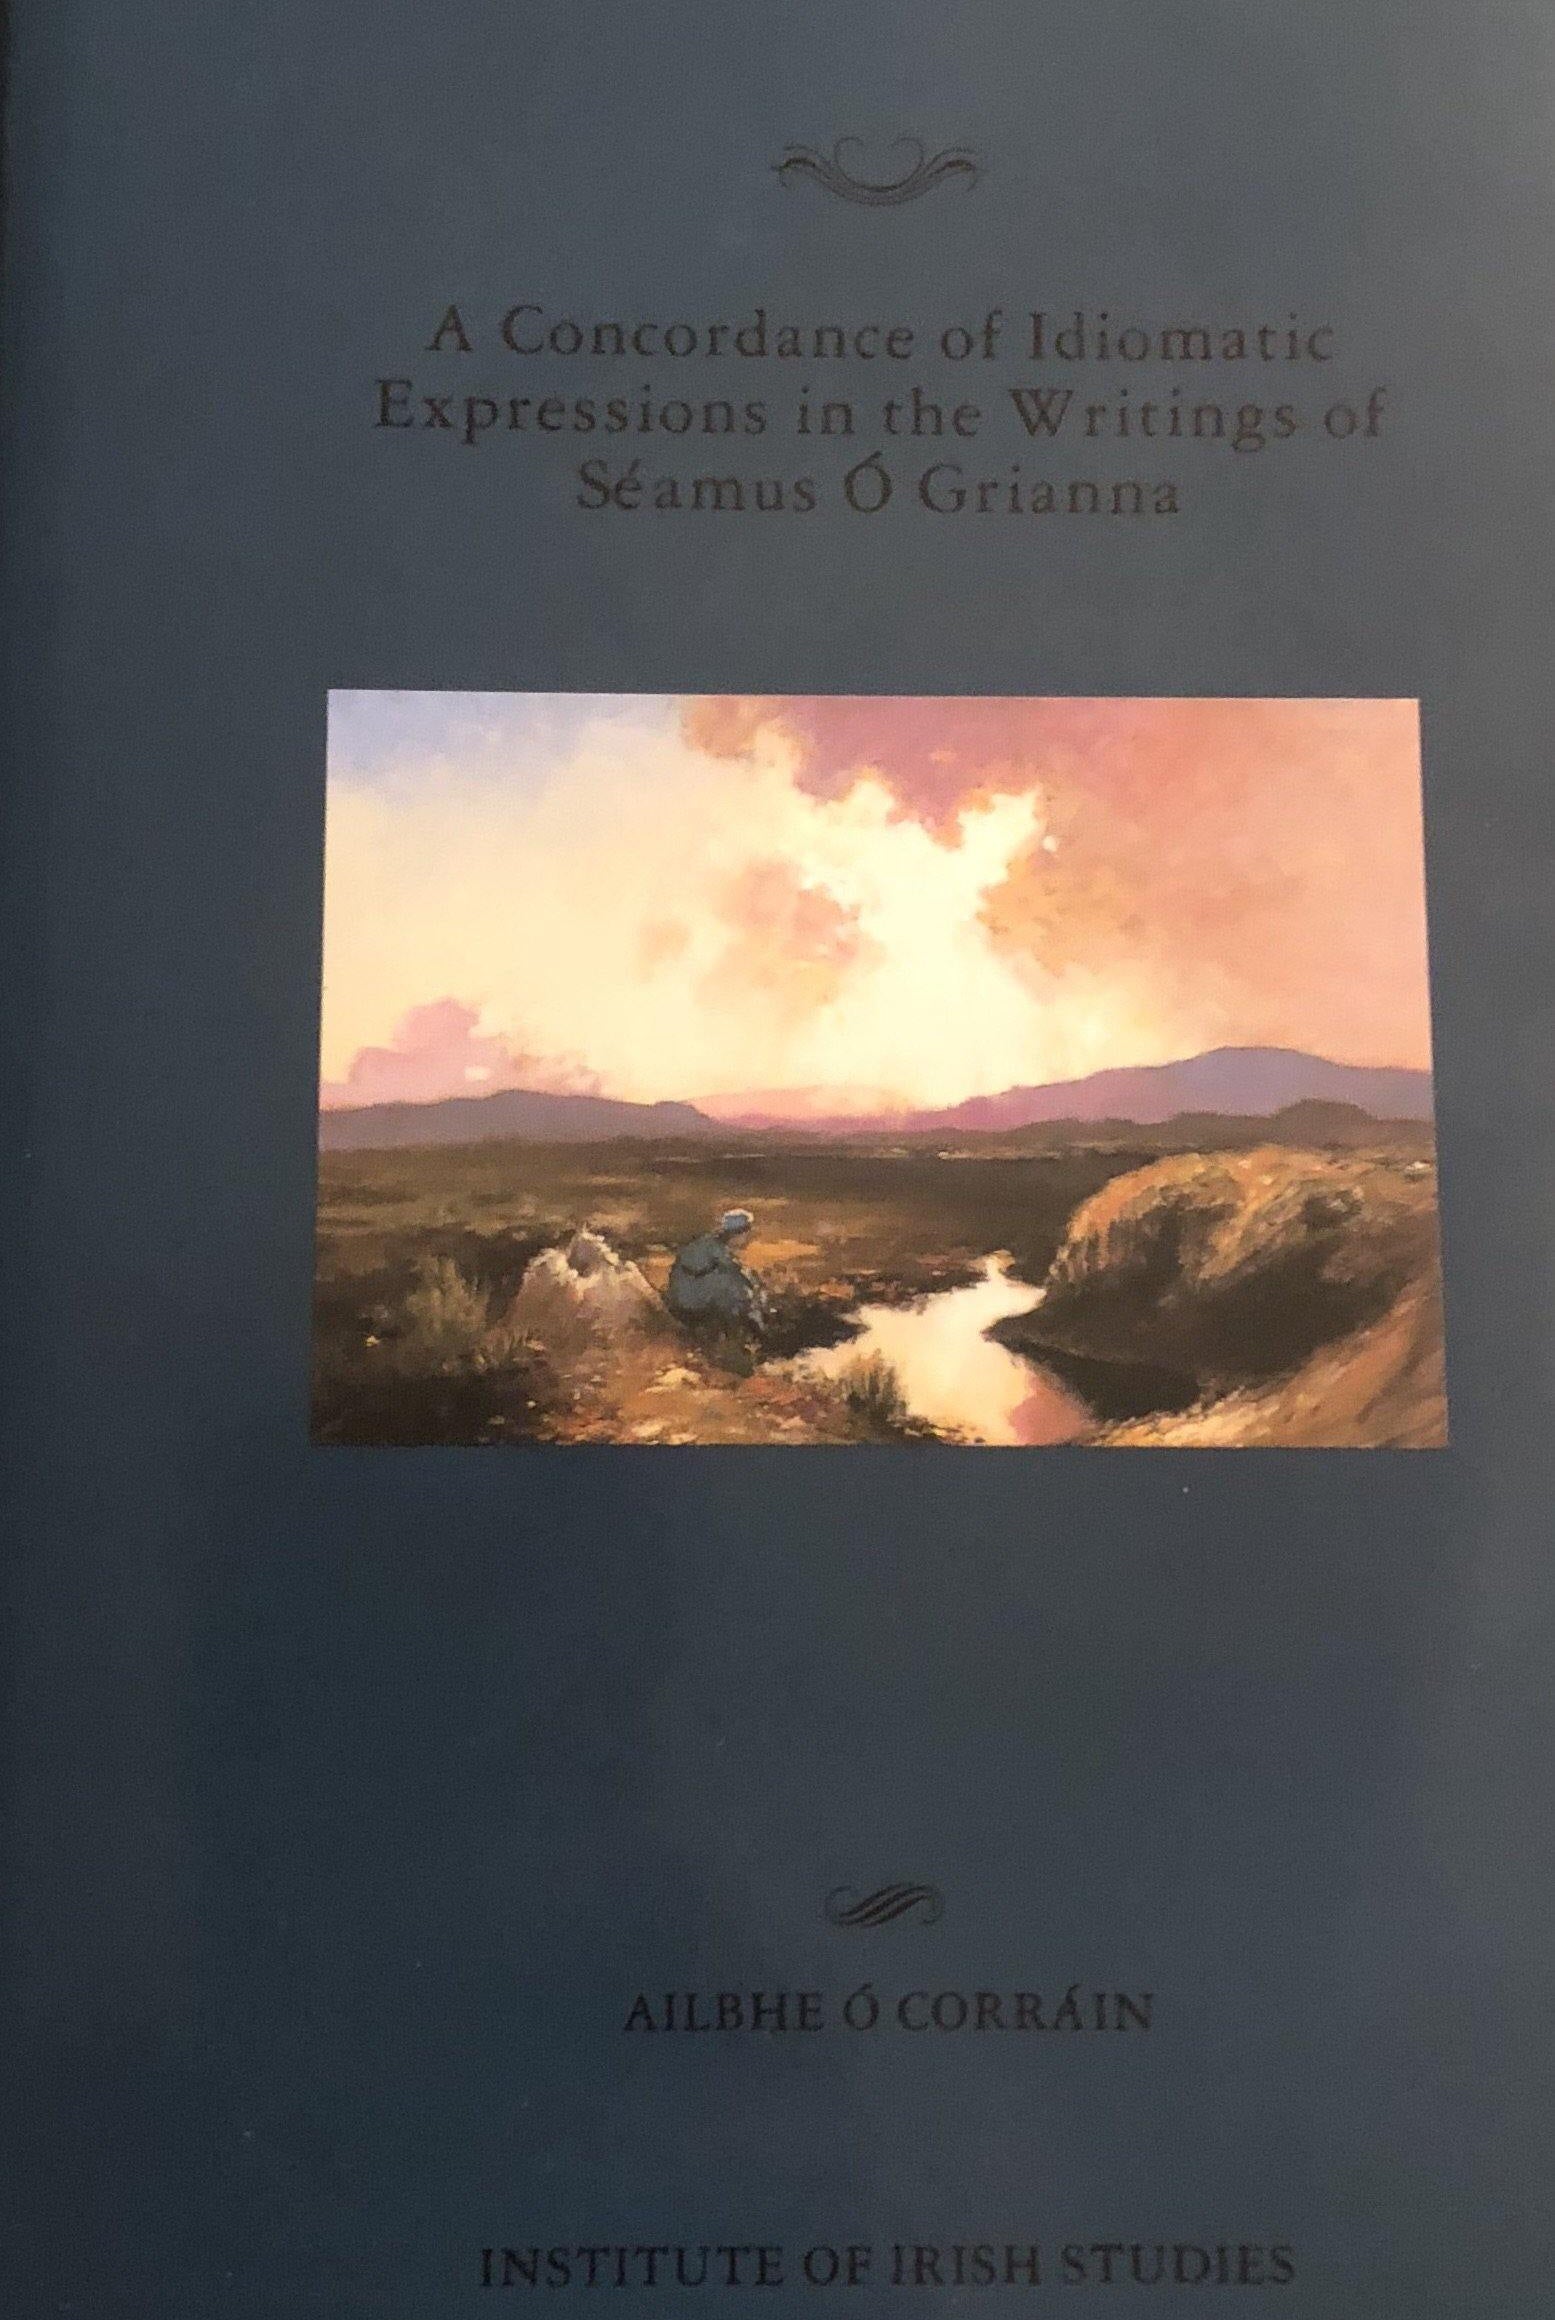 A concordance of idiomatic expressions in the writings of Séamus Ó Grianna - Belfast Books